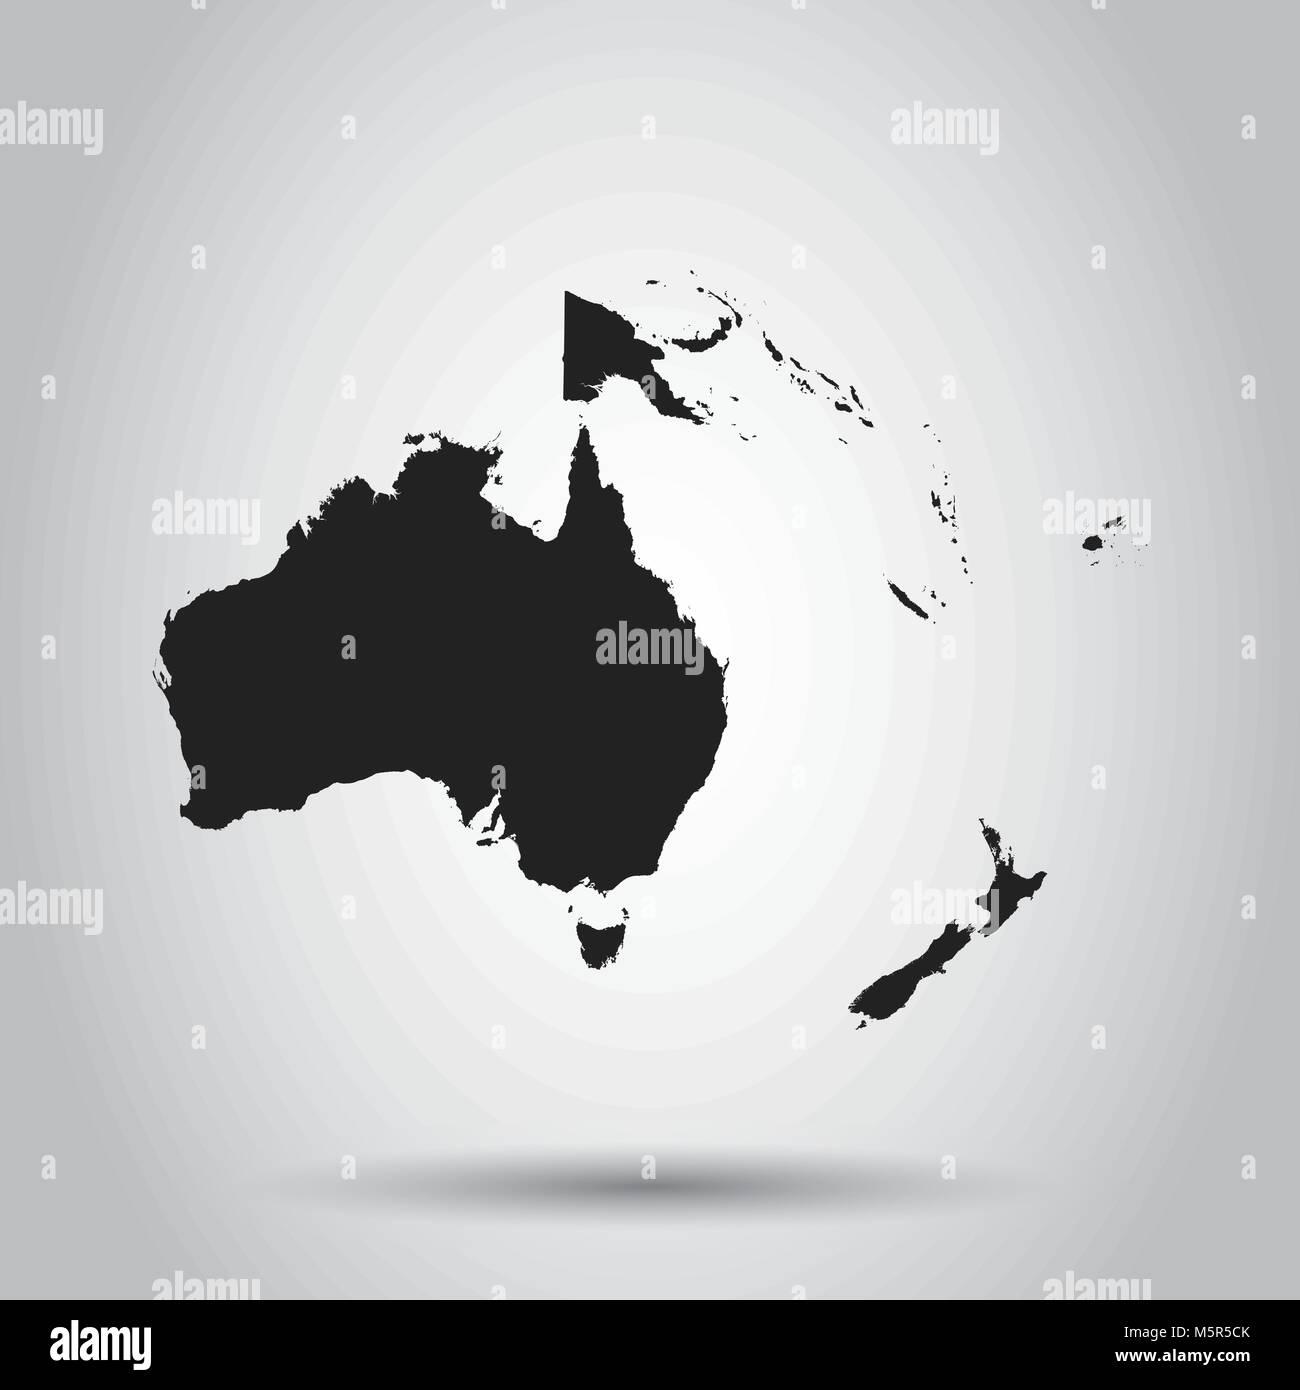 Australia and oceania map icon. Flat vector illustration. Australia sign symbol with shadow on white background. Stock Vector